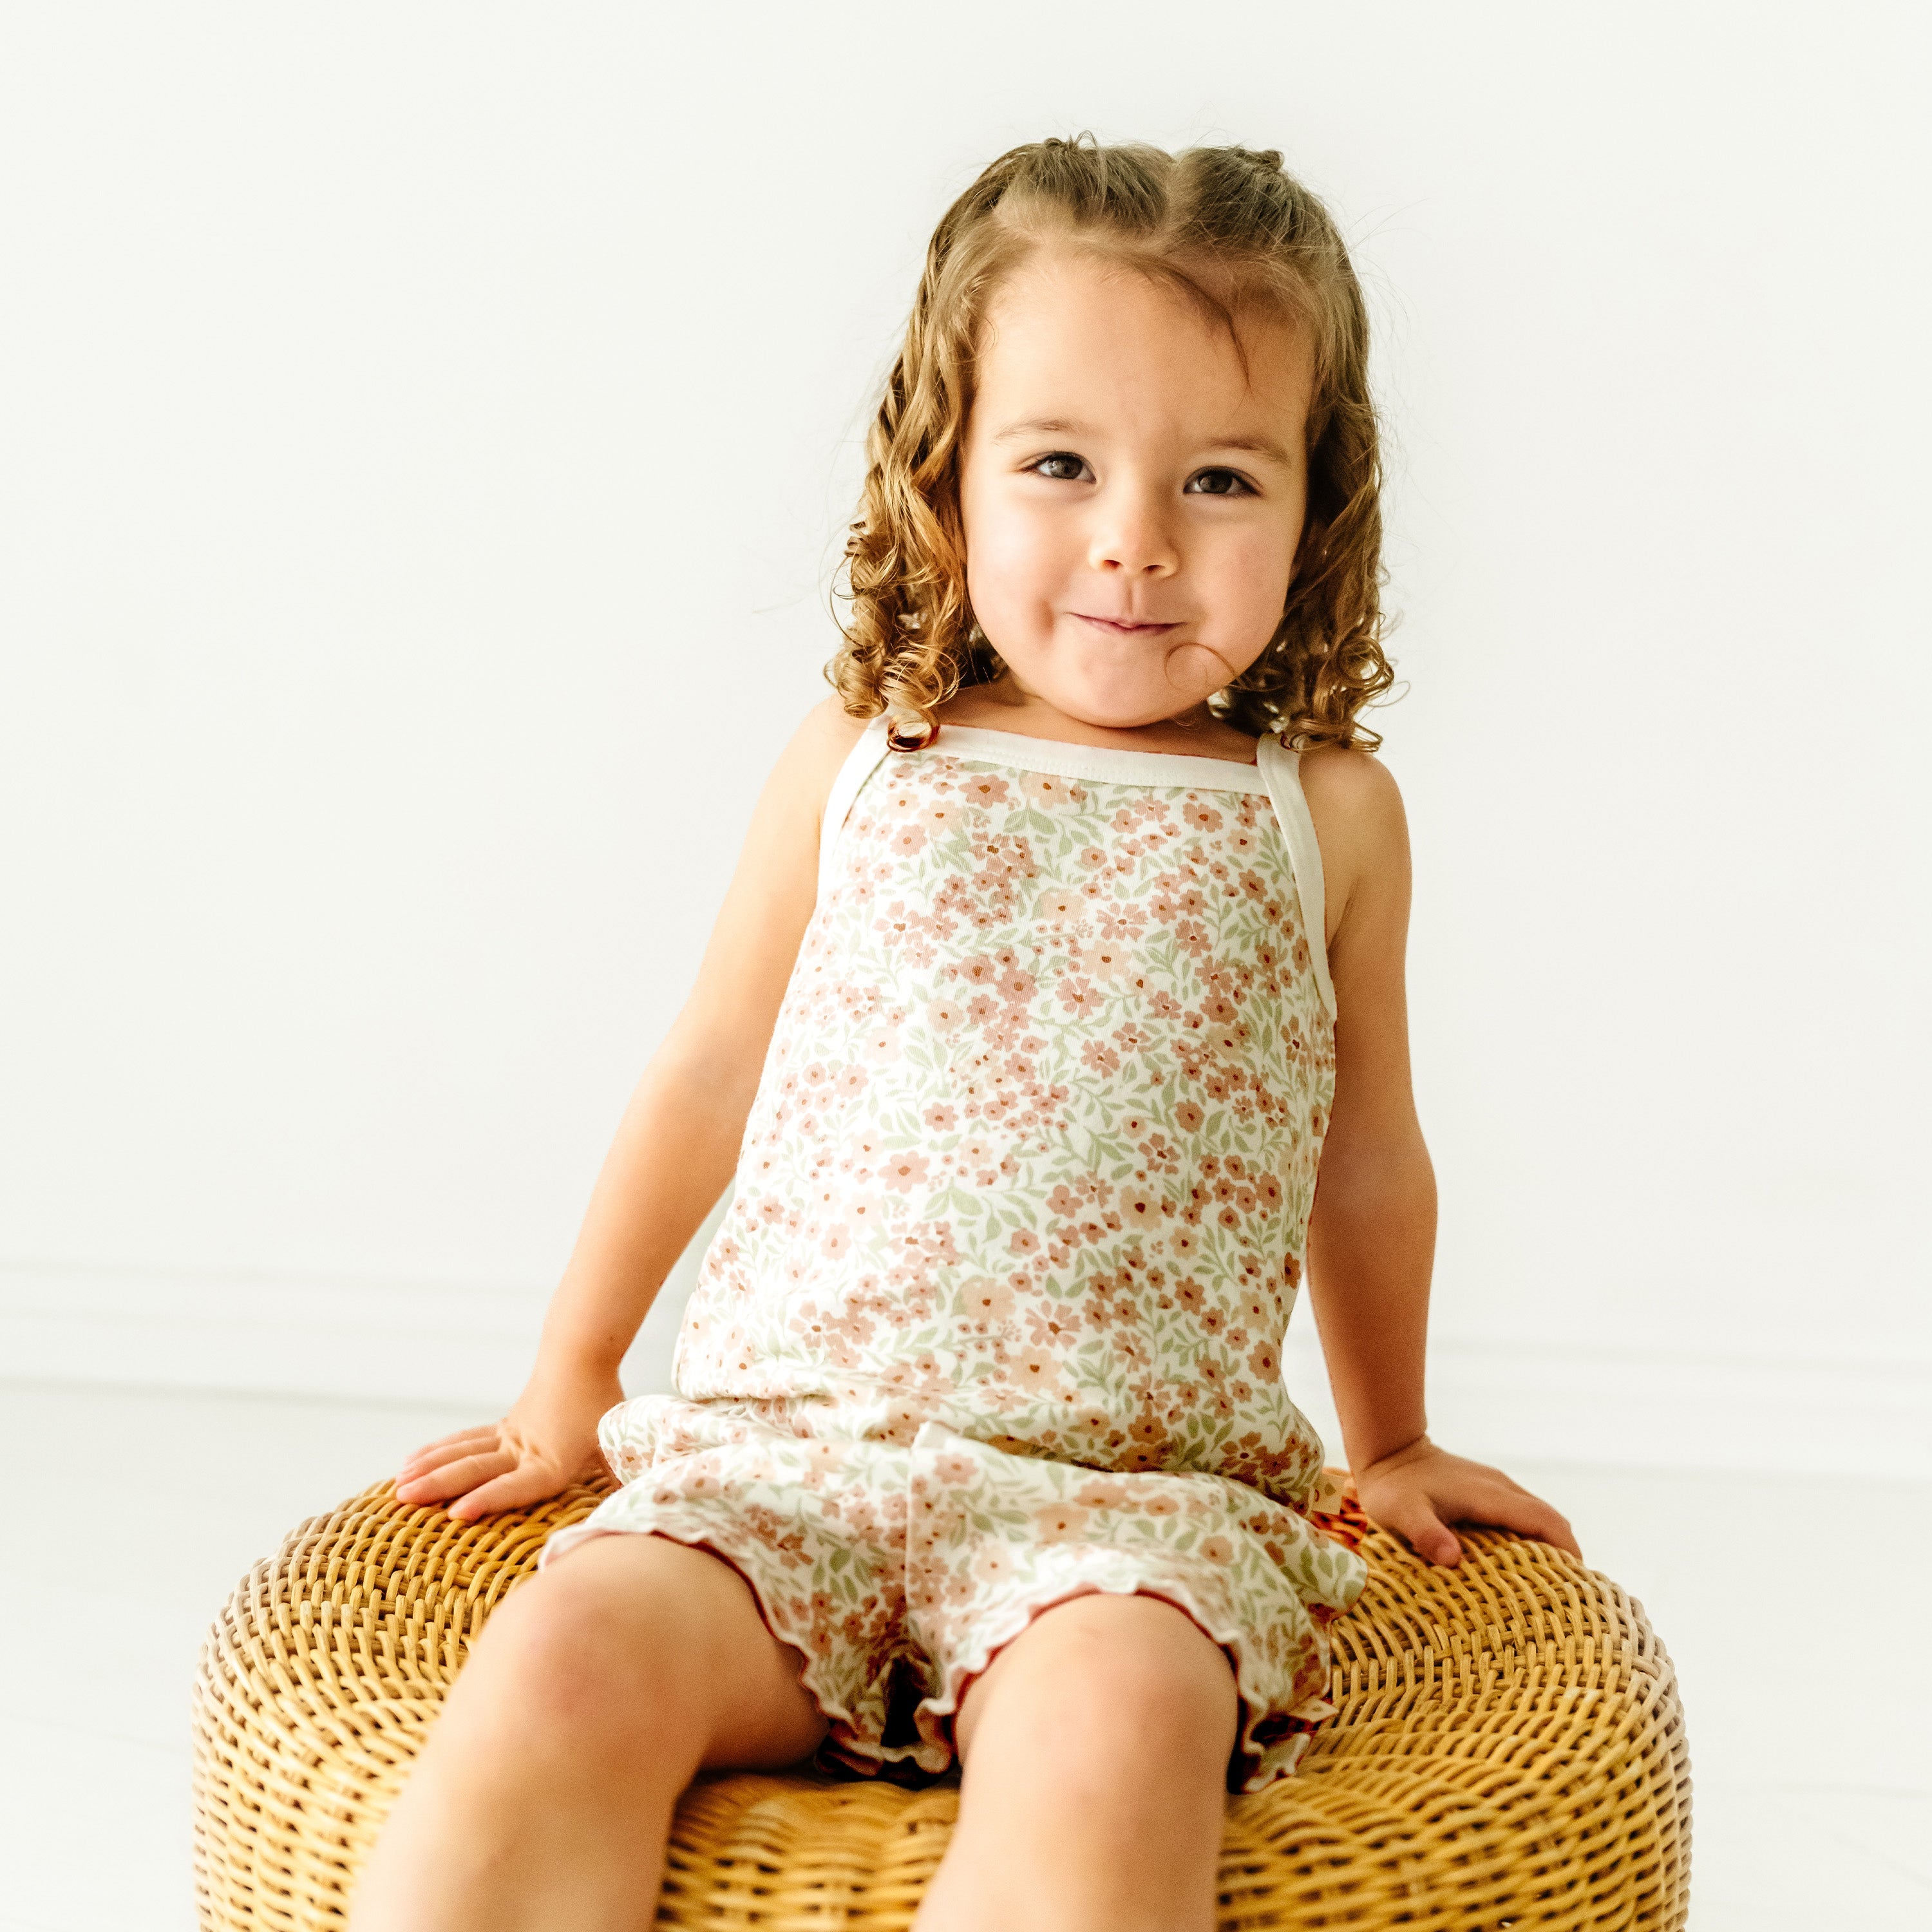 A young child with curly hair sits on a woven stool, wearing a Makemake Organics Organic Spaghetti Top & Shorts Set - Summer Floral, smiling playfully at the camera in a bright, white room.